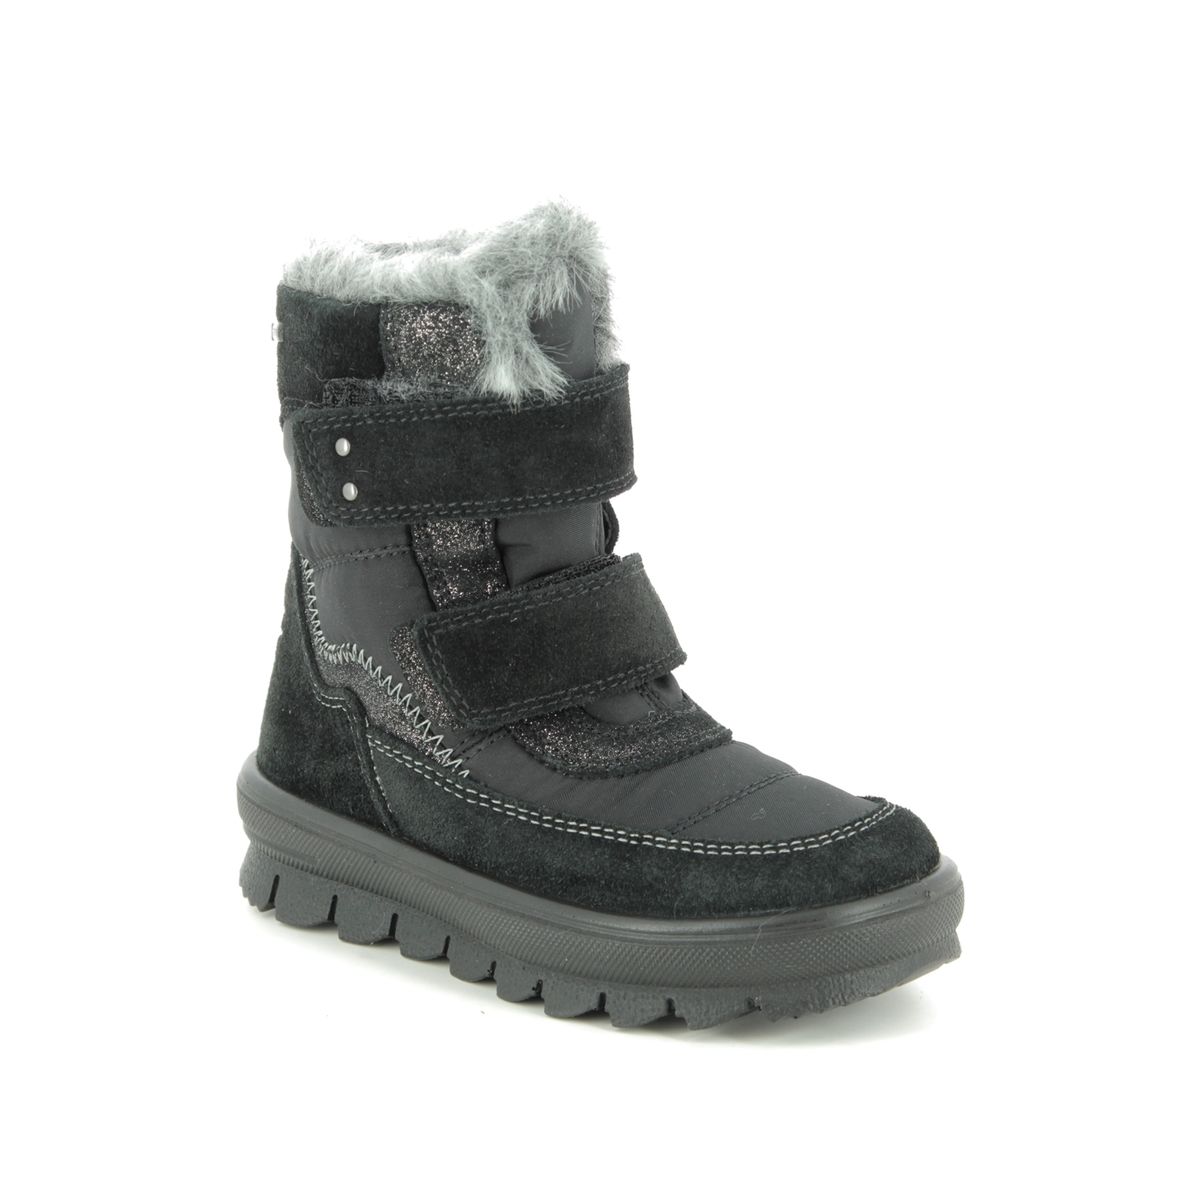 Superfit Flavia Vel Gtx Black Suede Kids Toddler Girls Boots 09214-00 In Size 32 In Plain Black Suede For kids